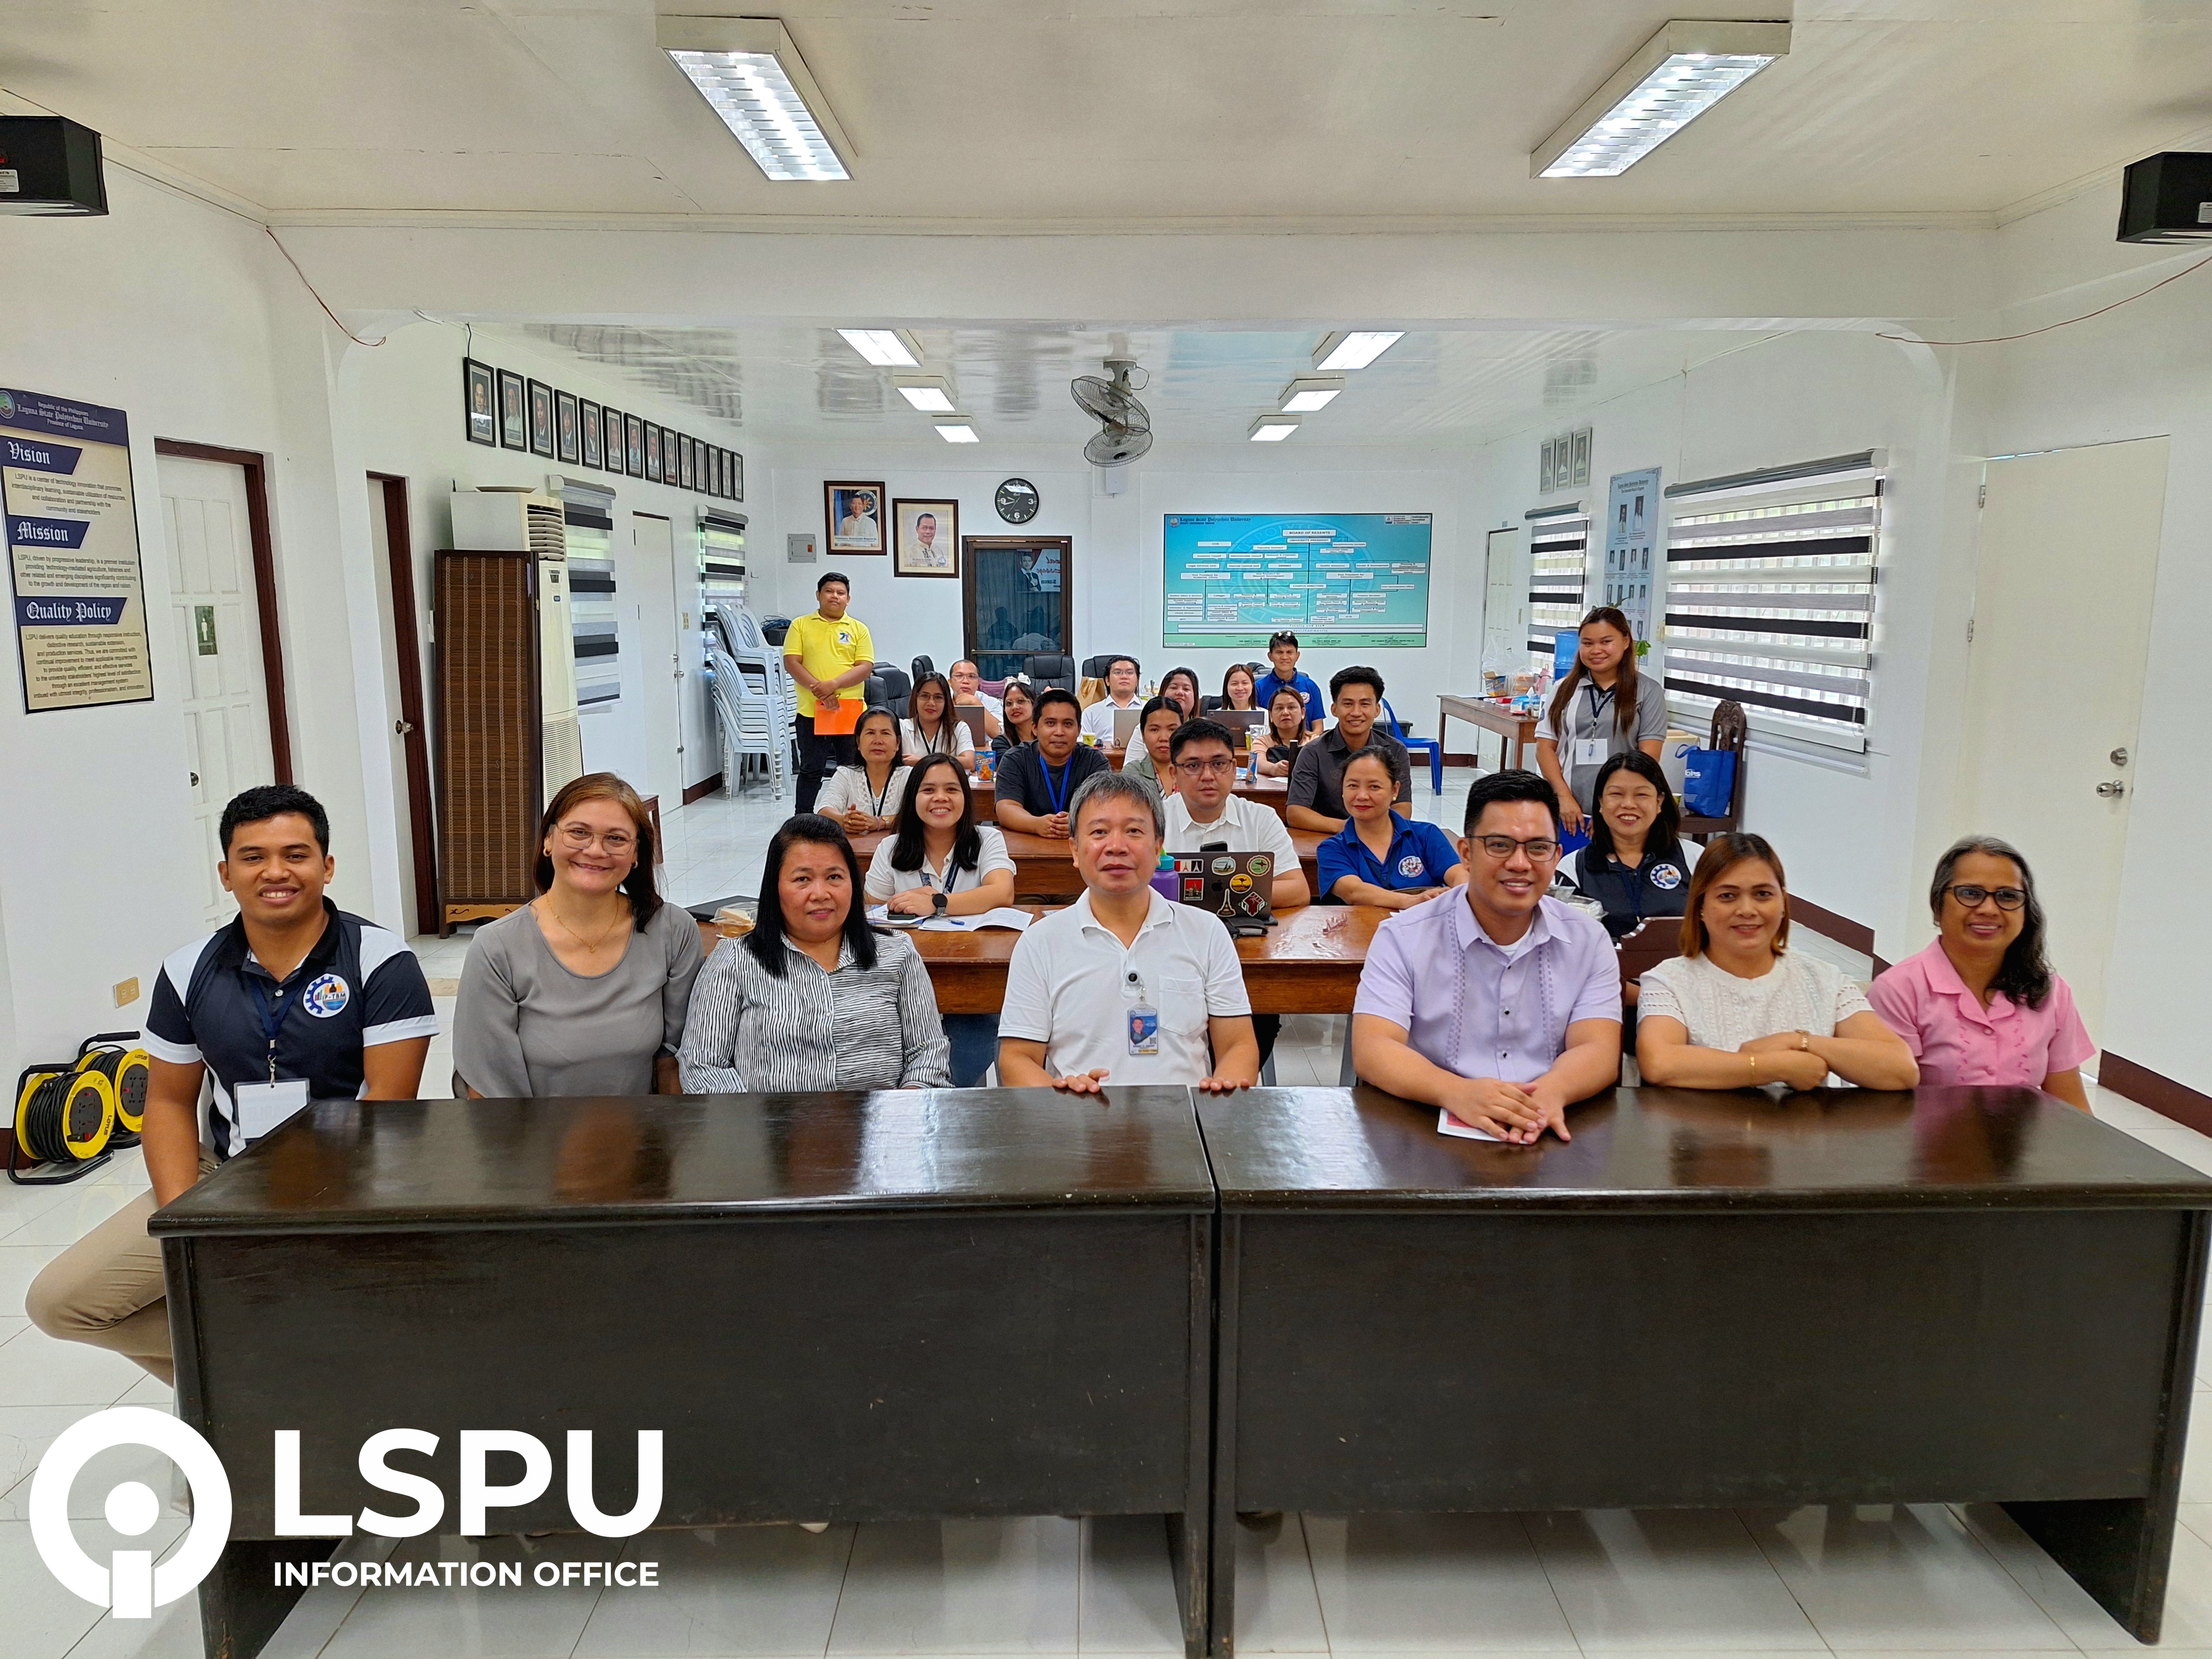 LSPU-LBC IP-TBM amps up IP protection skills of faculty and researchers